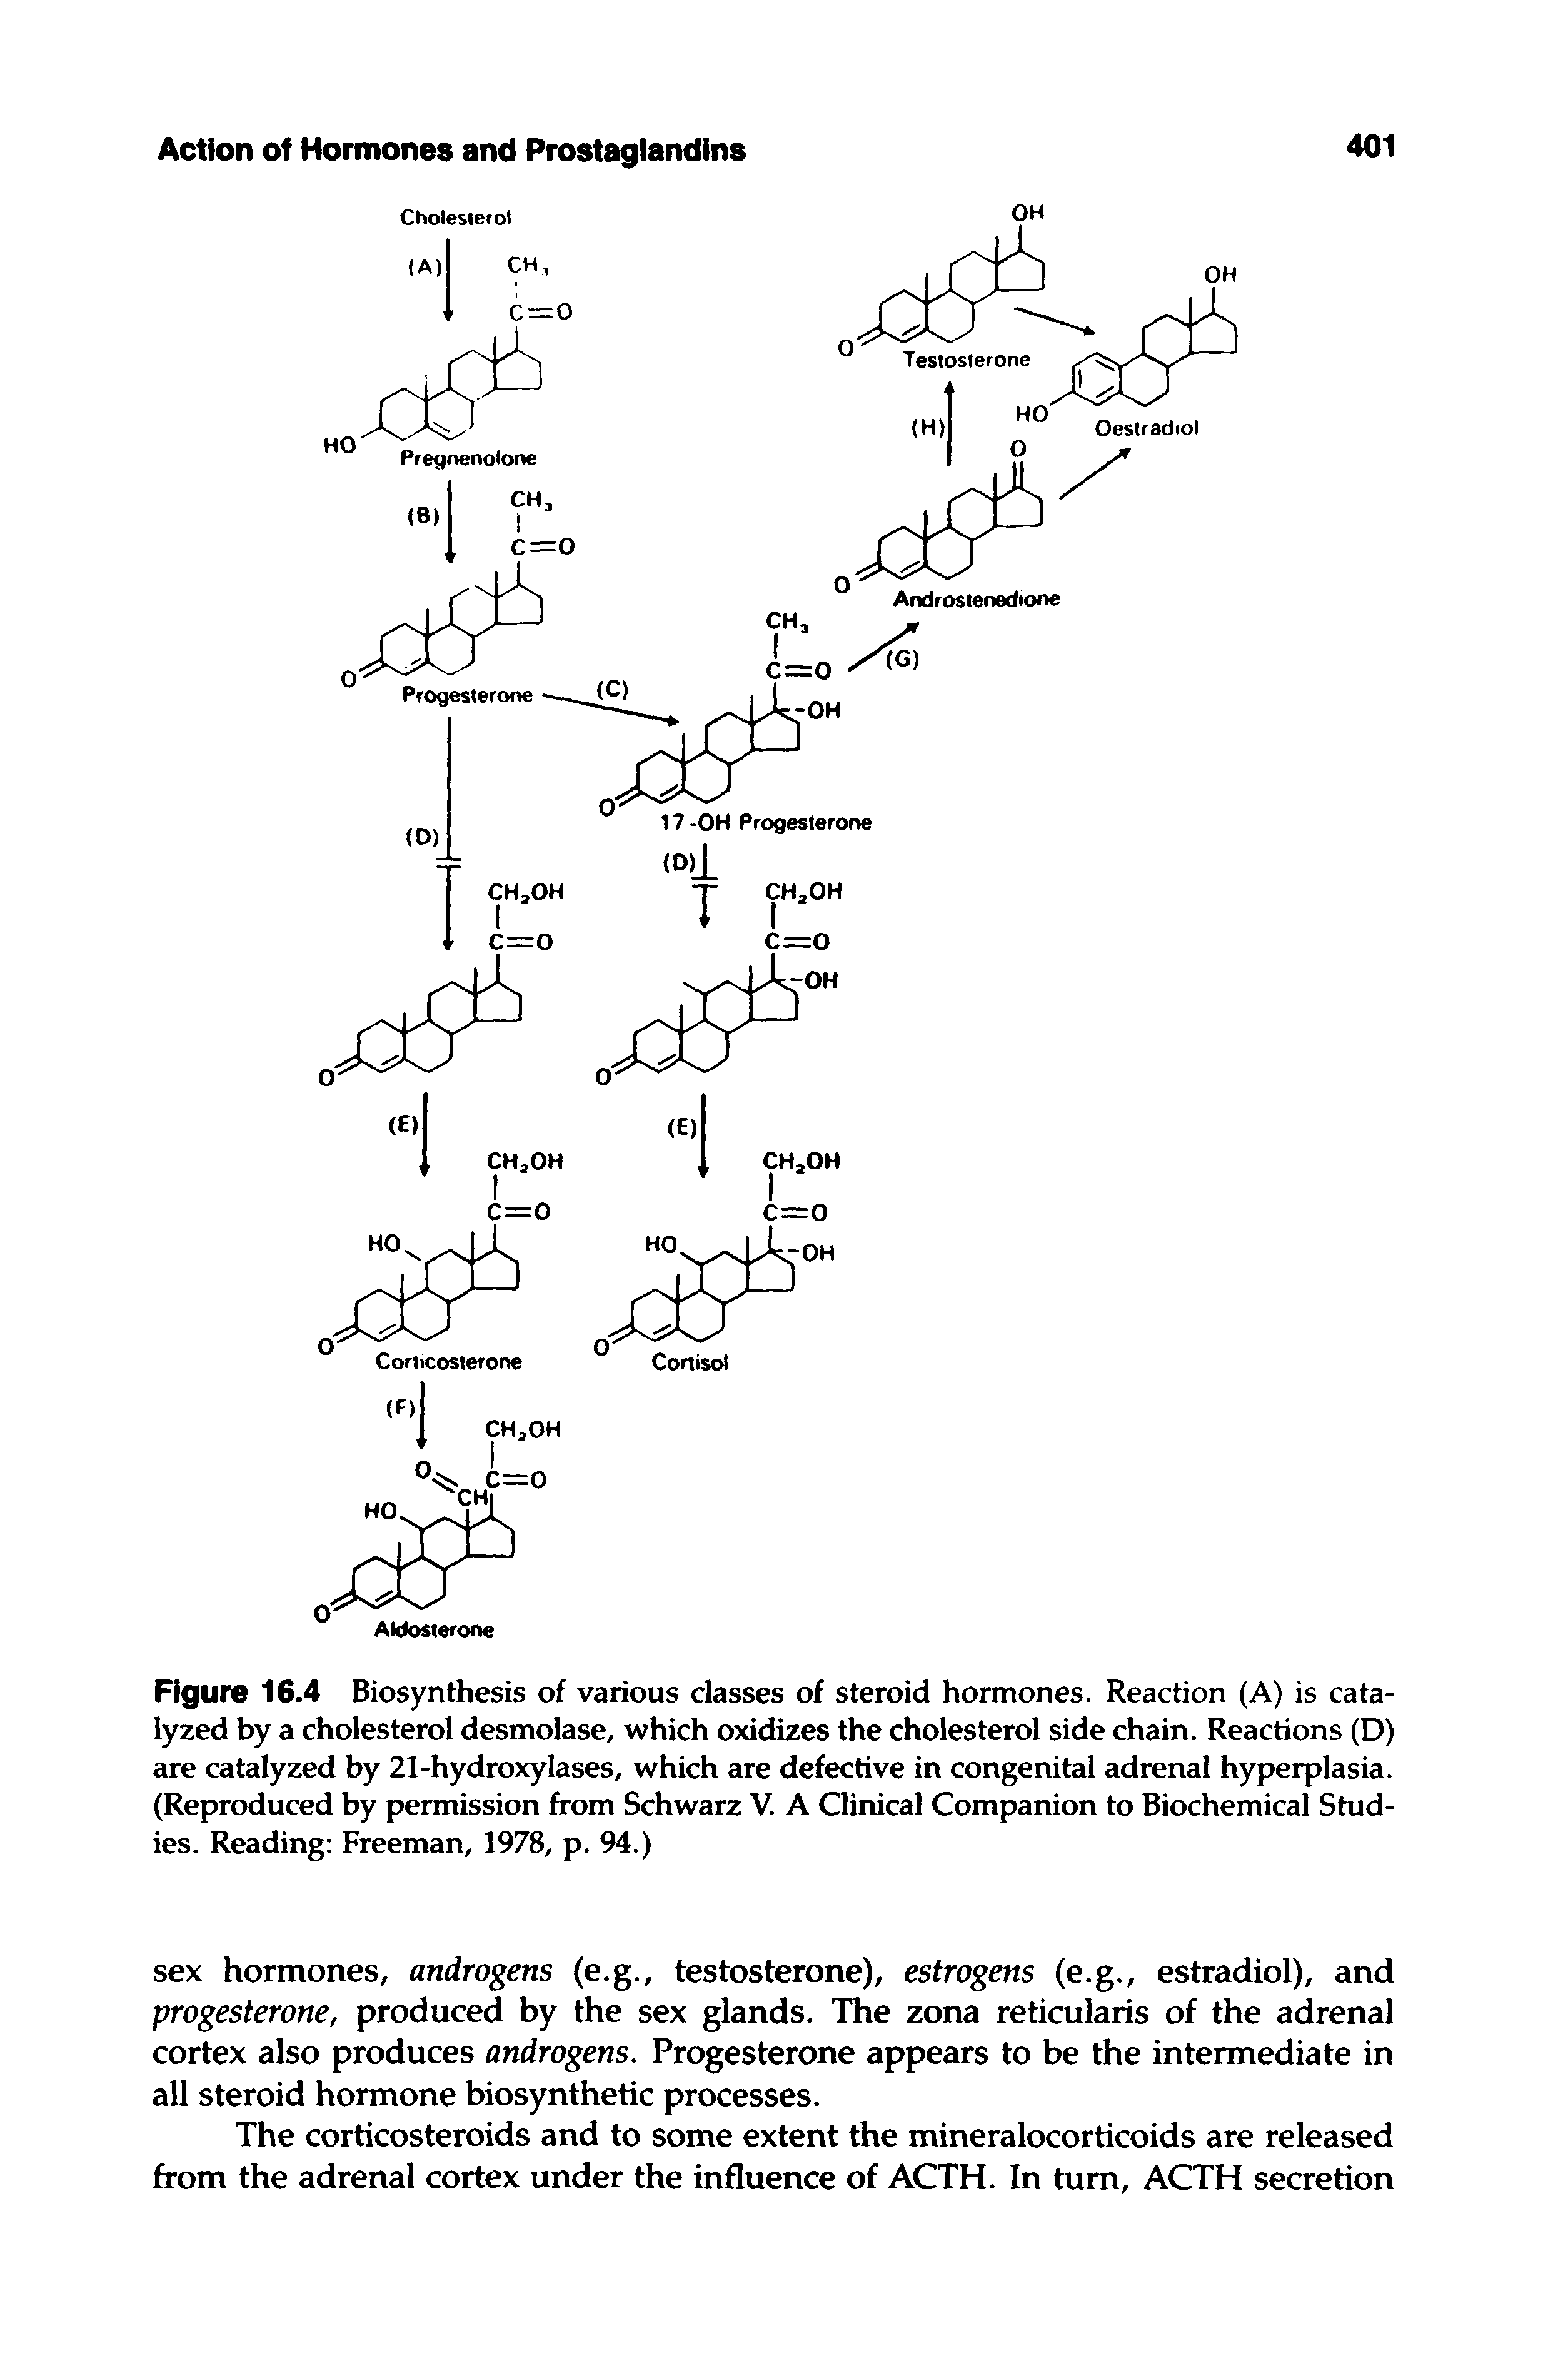 Figure 16.4 Biosynthesis of various classes of steroid hormones. Reaction (A) is catalyzed by a cholesterol desmolase, which oxidizes the cholesterol side chain. Reactions (D) are catalyzed by 21-hydroxylases, which are defective in congenital adrenal hyperplasia. (Reproduced by permission from Schwarz V. A Clinical Companion to Biochemical Studies. Reading Freeman, 1978, p. 94.)...